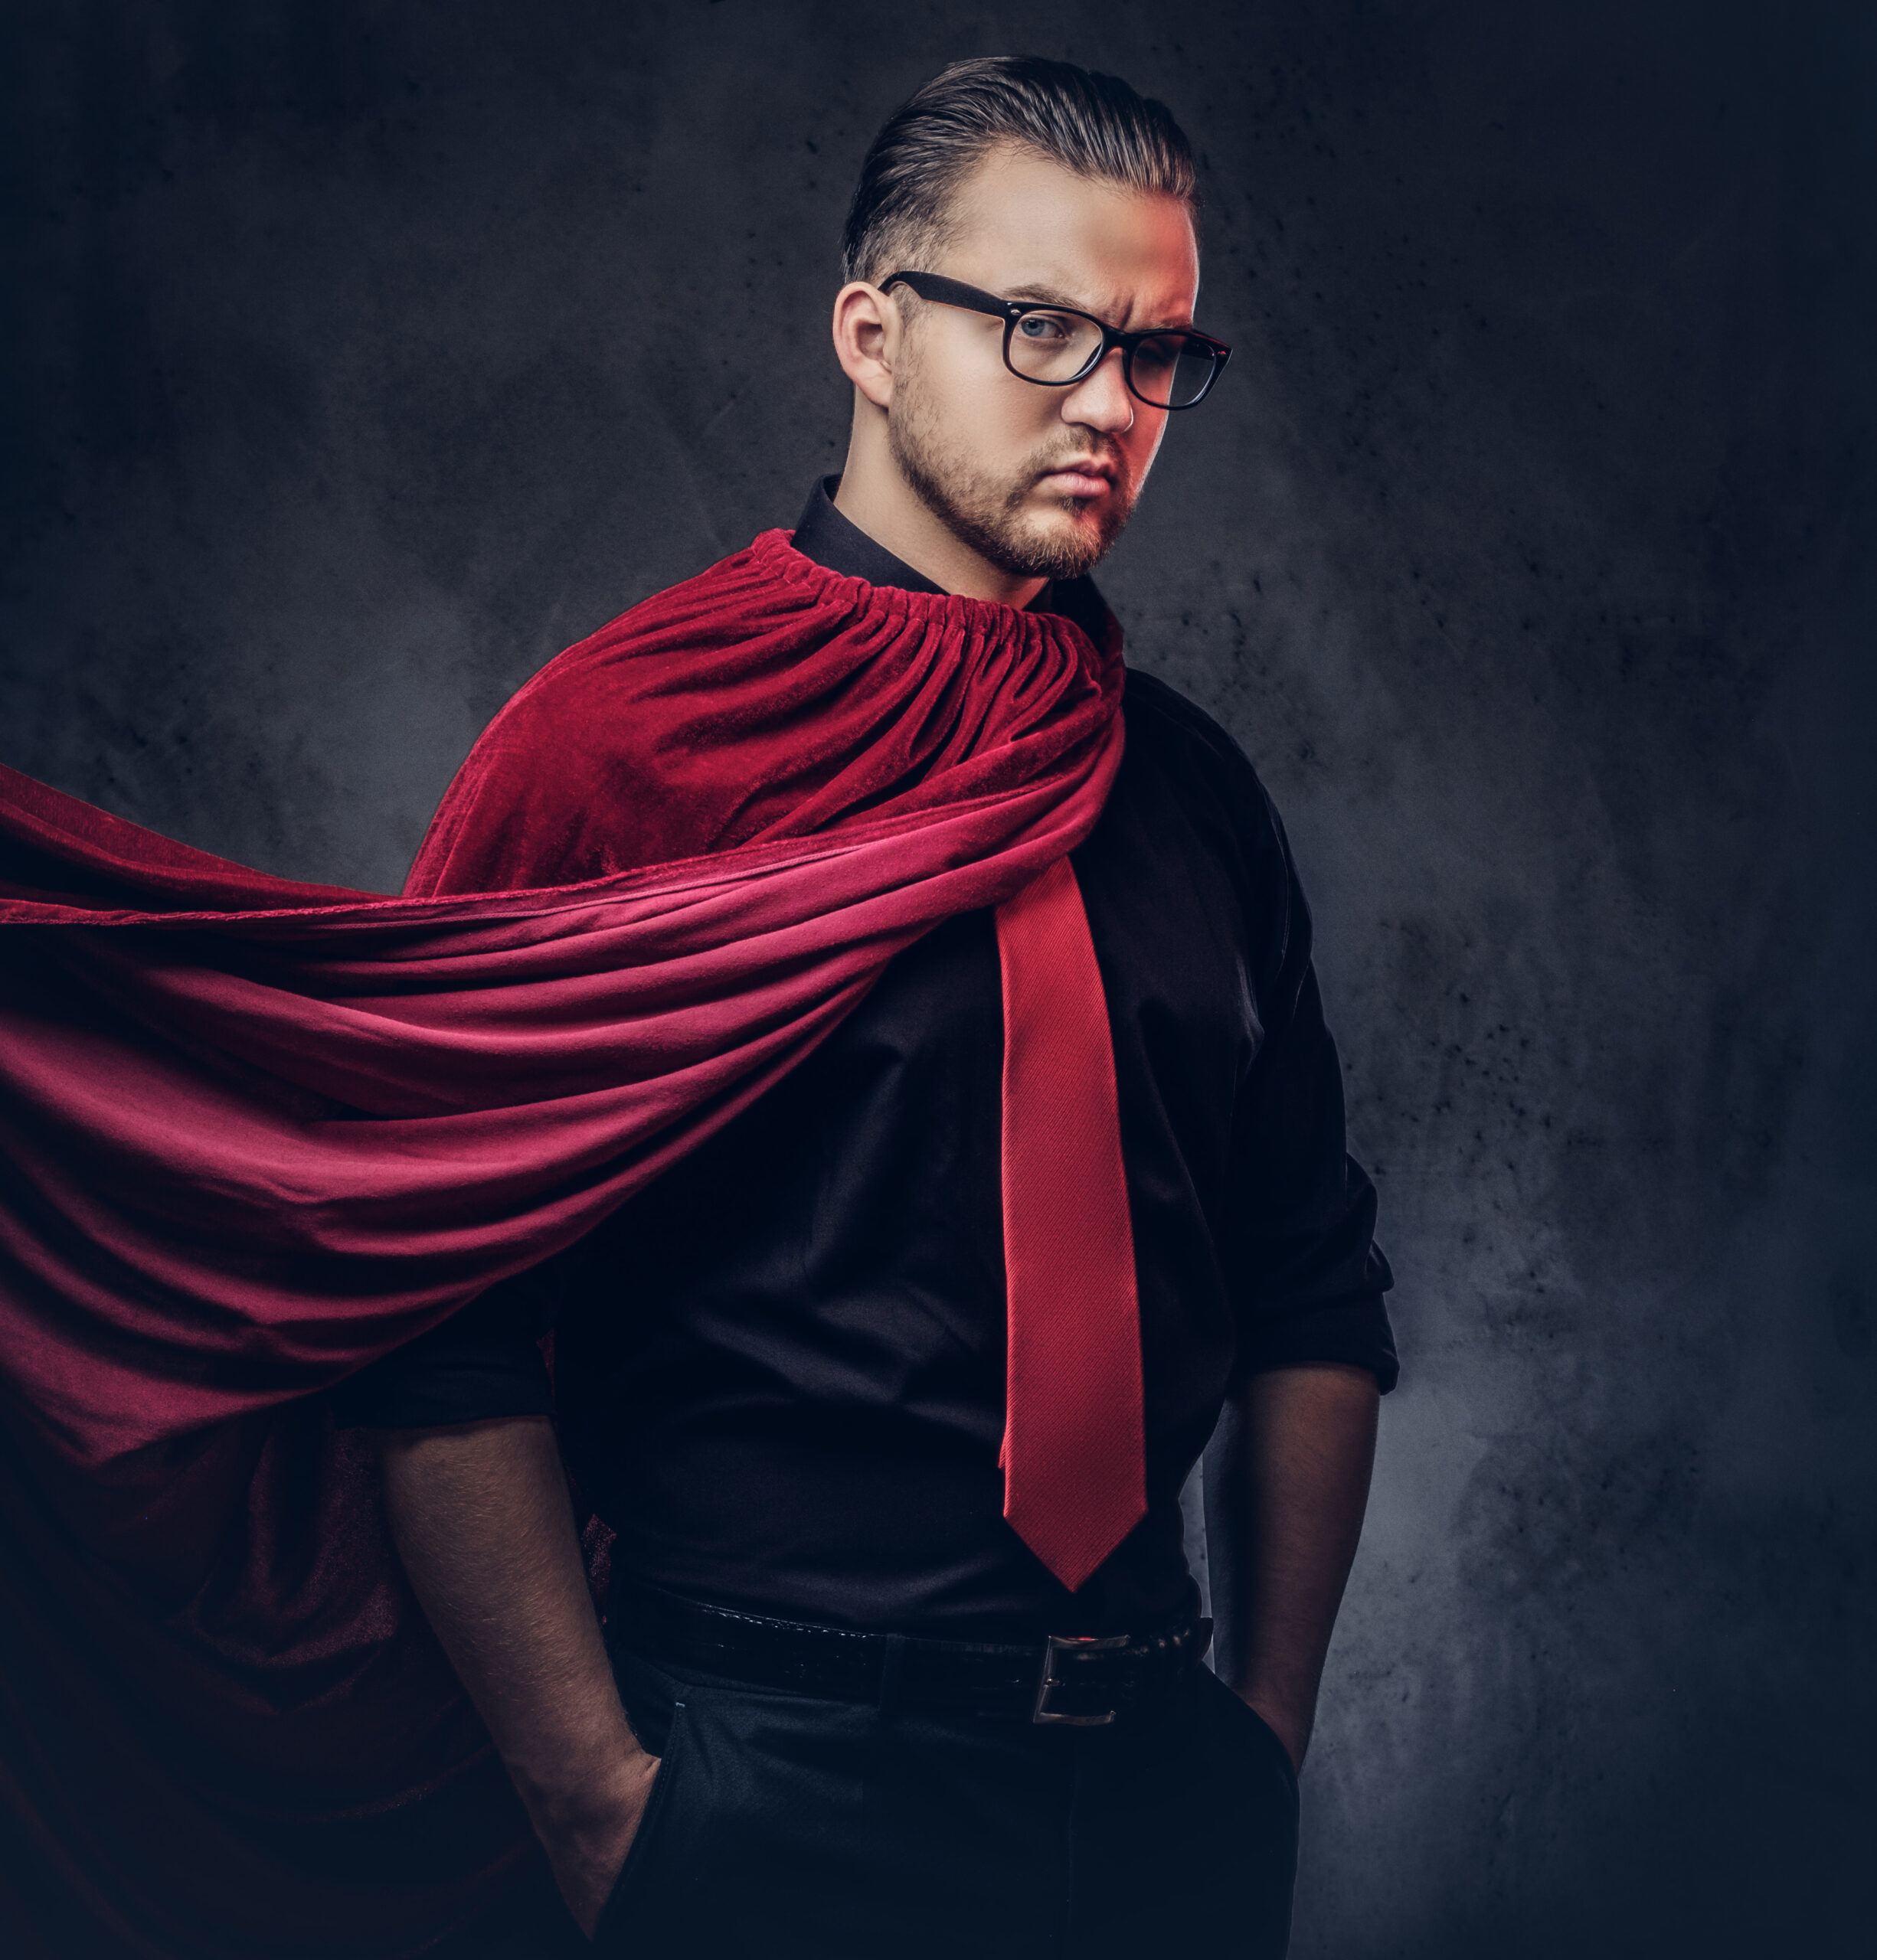 Stock photo of man with Red Tie and Black Shirt with Glasses. Stock photo of man with Red Tie and Black Shirt.